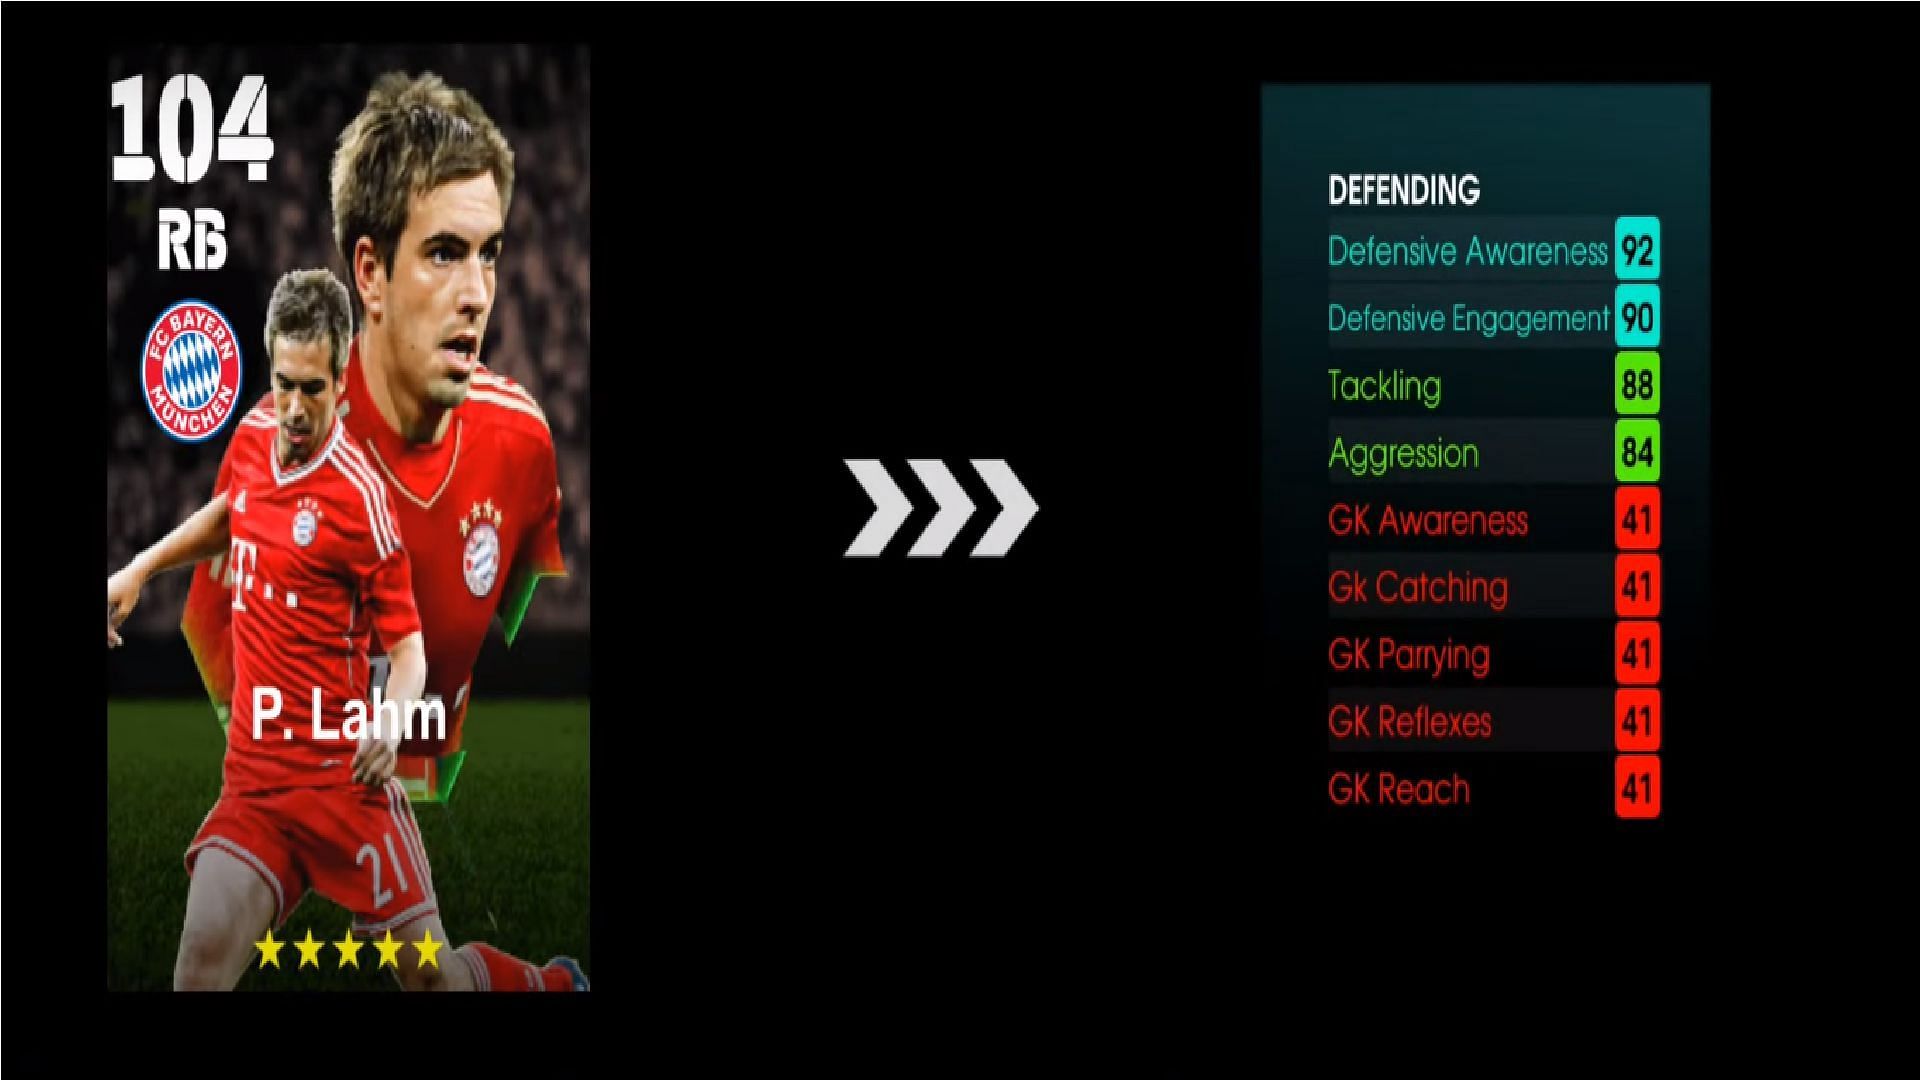 Here are some improved stats of Philipp Lahm after training (Image via YouTube/ Dexter Gaming)